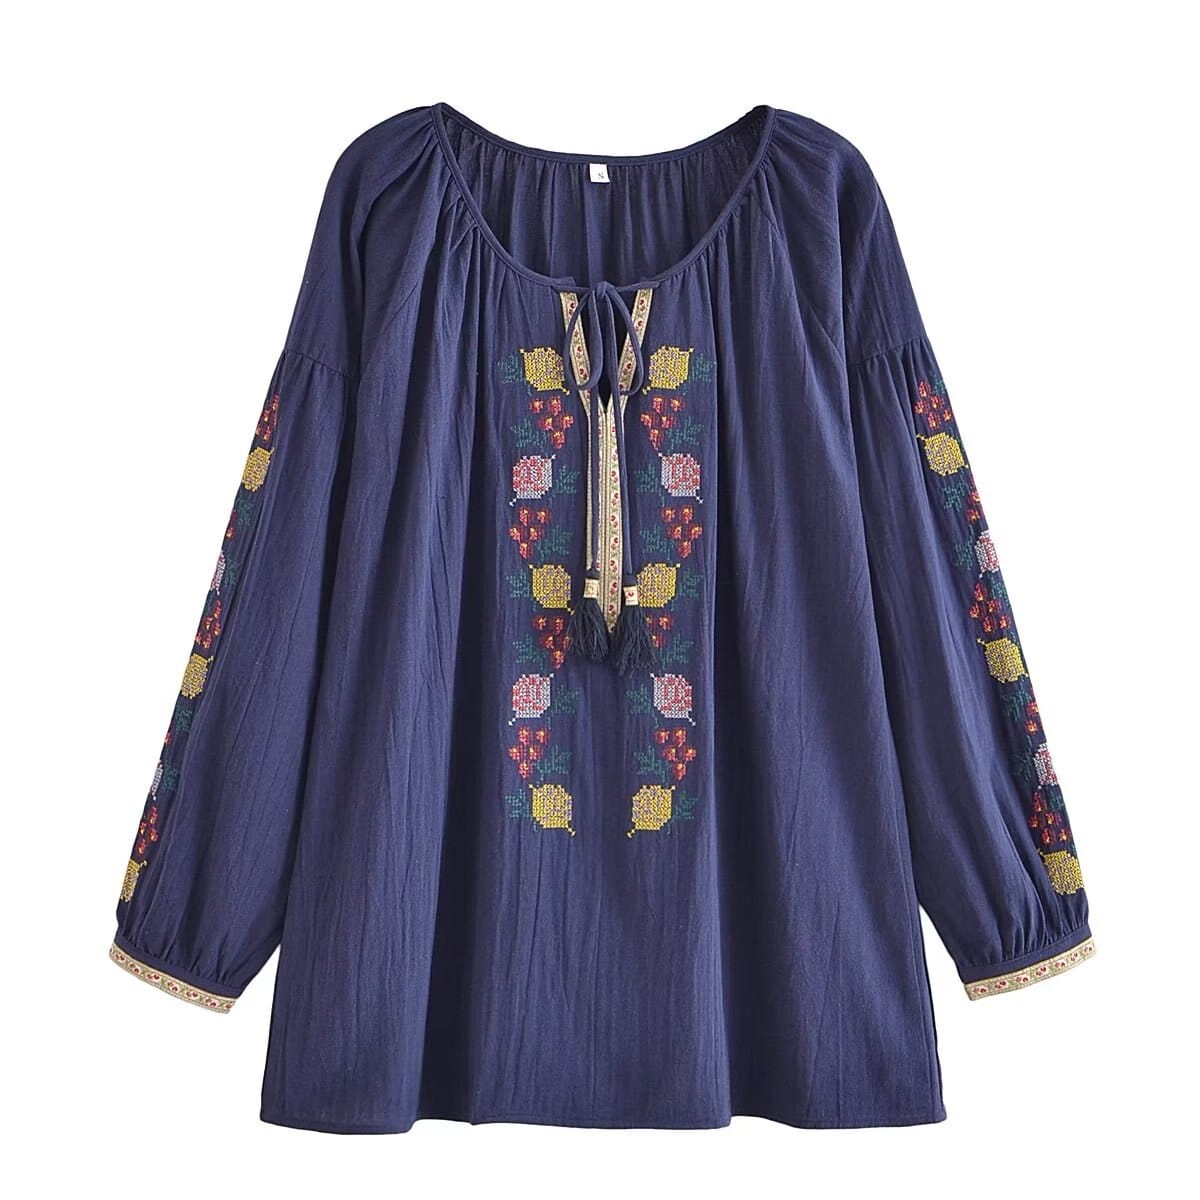 wickedafstore 0 Navy / S Boho Blossom Embroidered Blouse